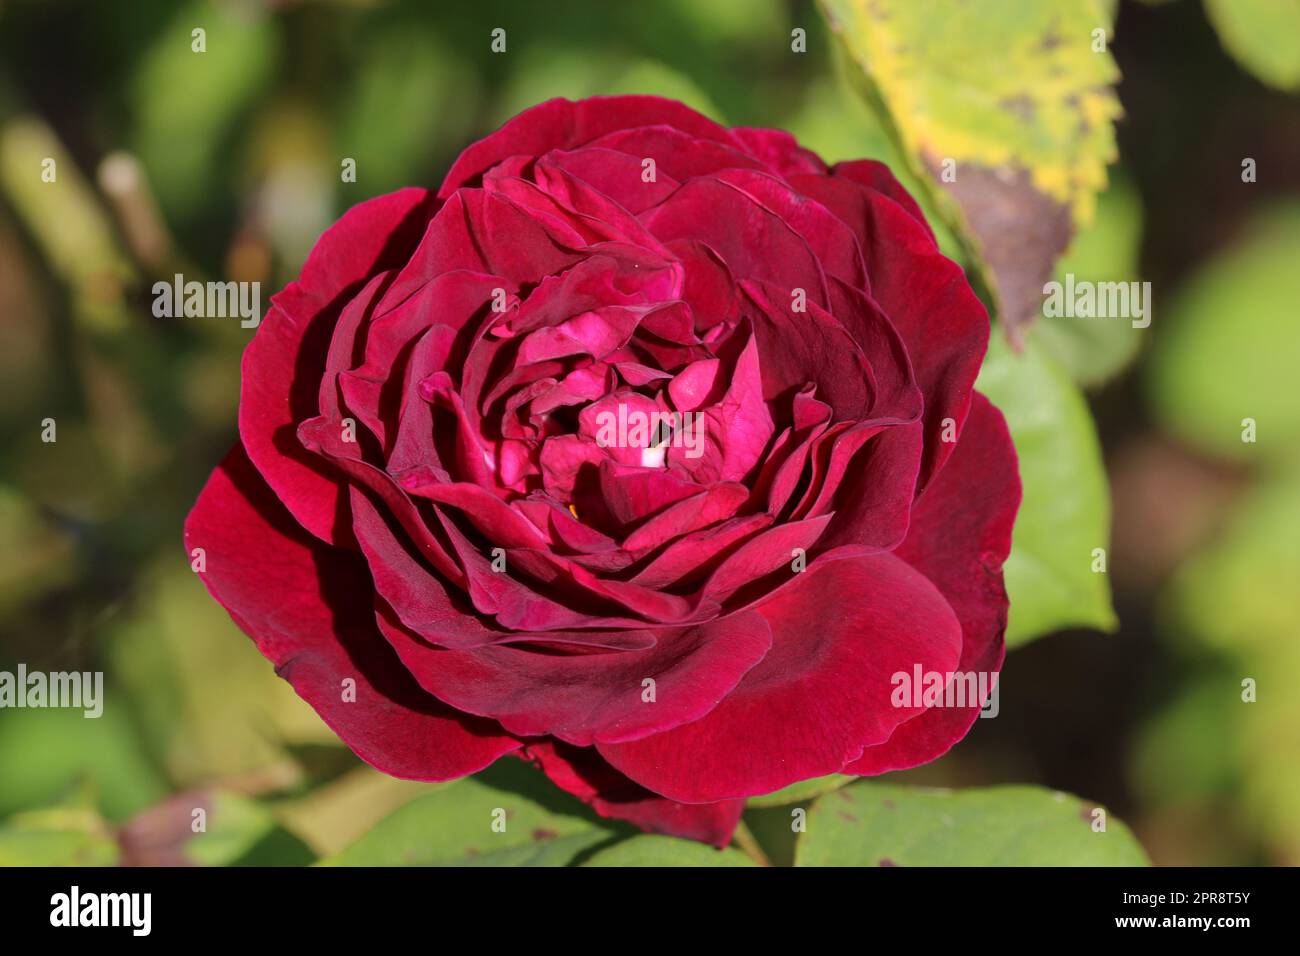 Red rose flower in close up Stock Photo